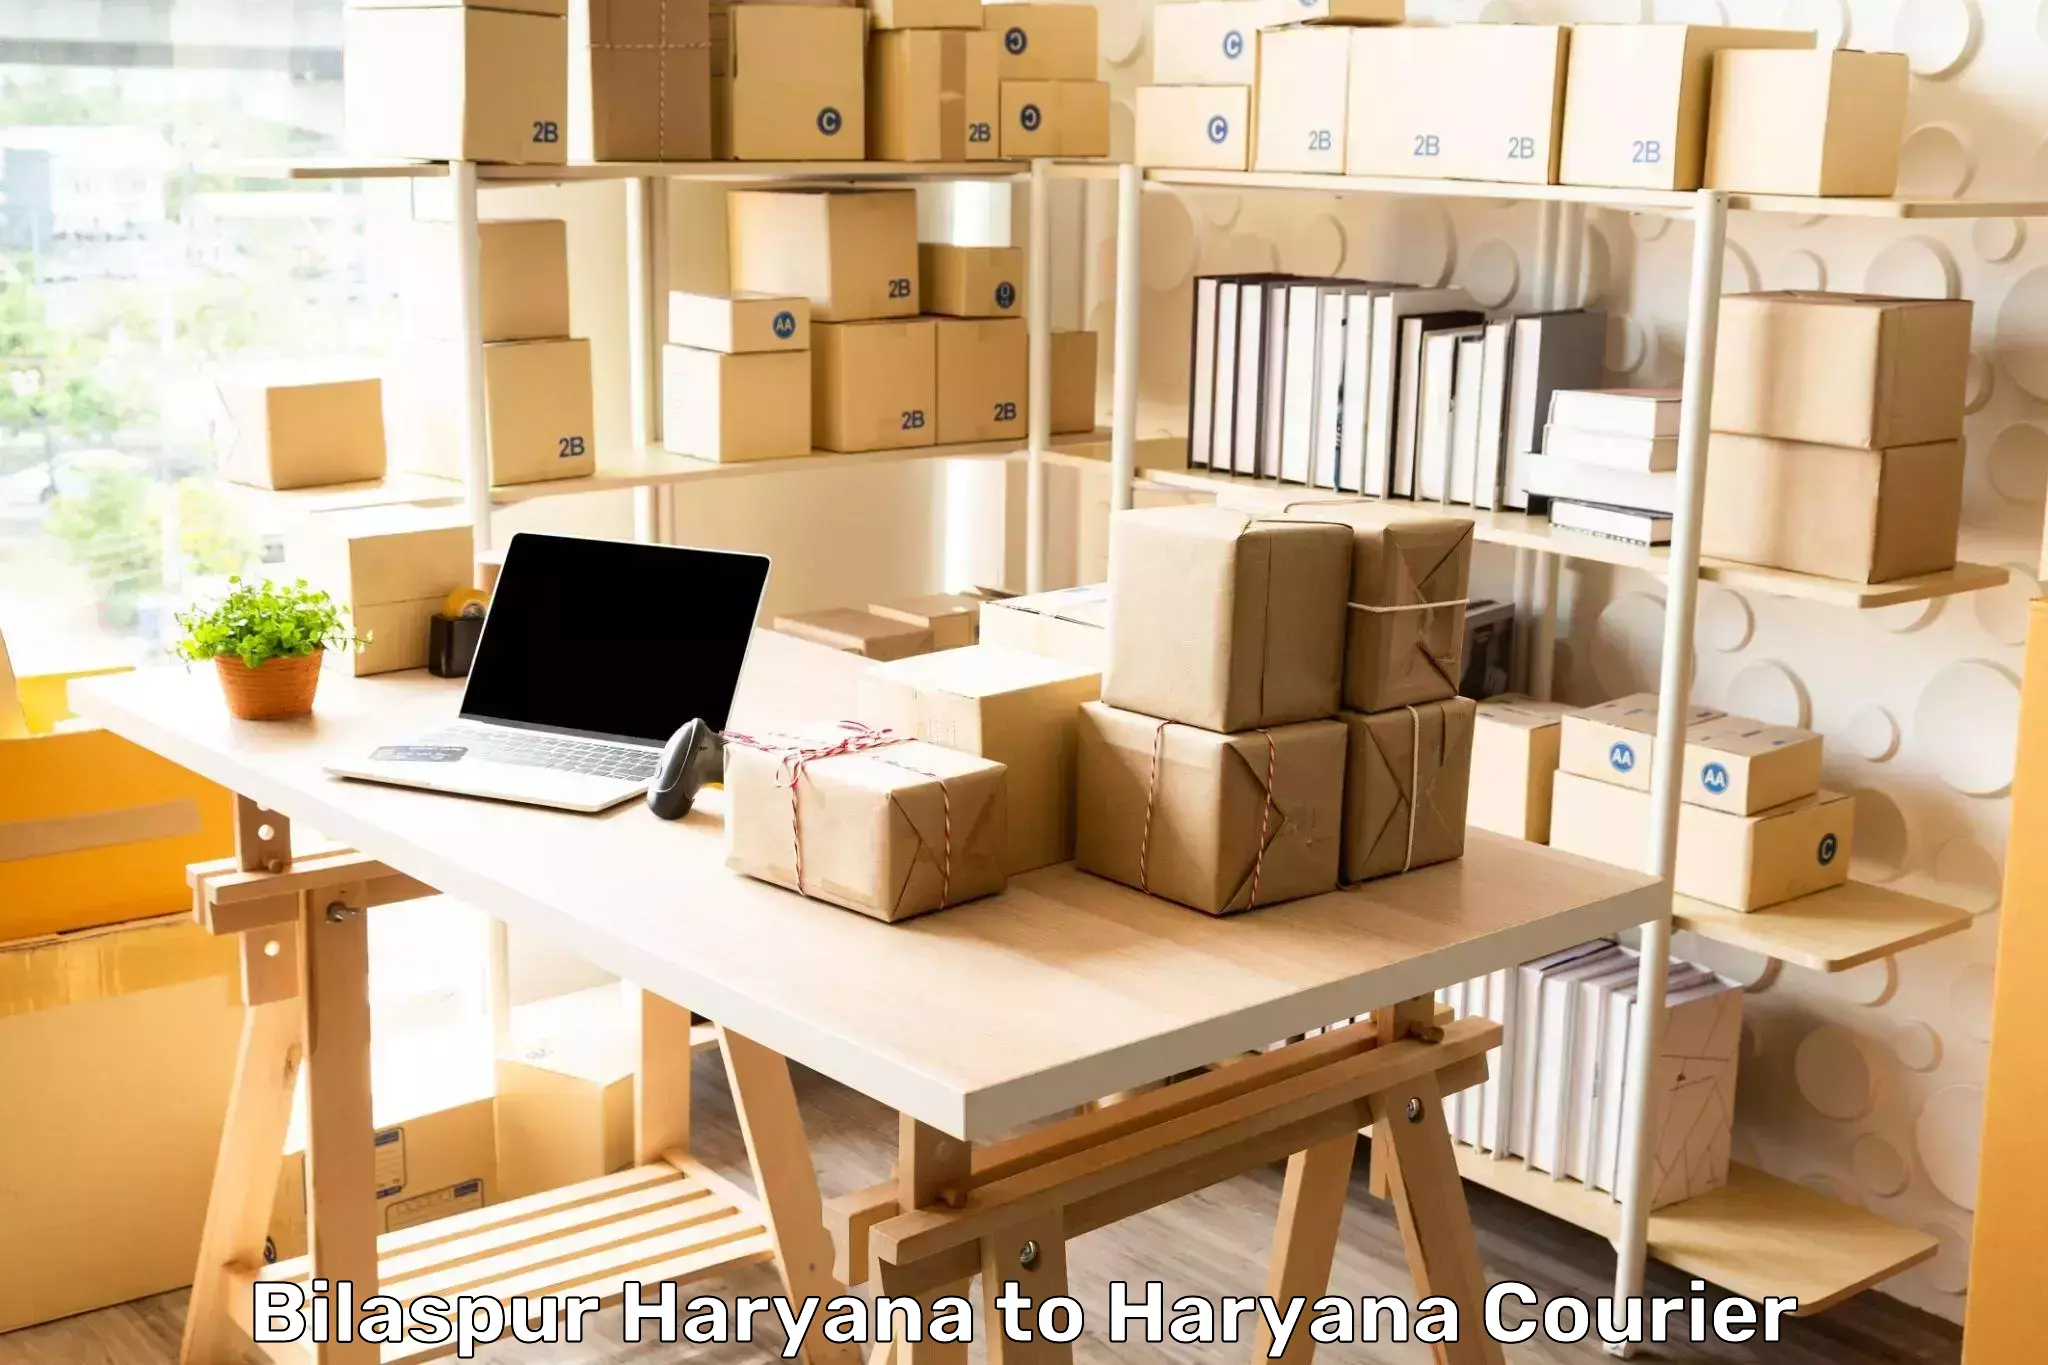 Package delivery network Bilaspur Haryana to Haryana